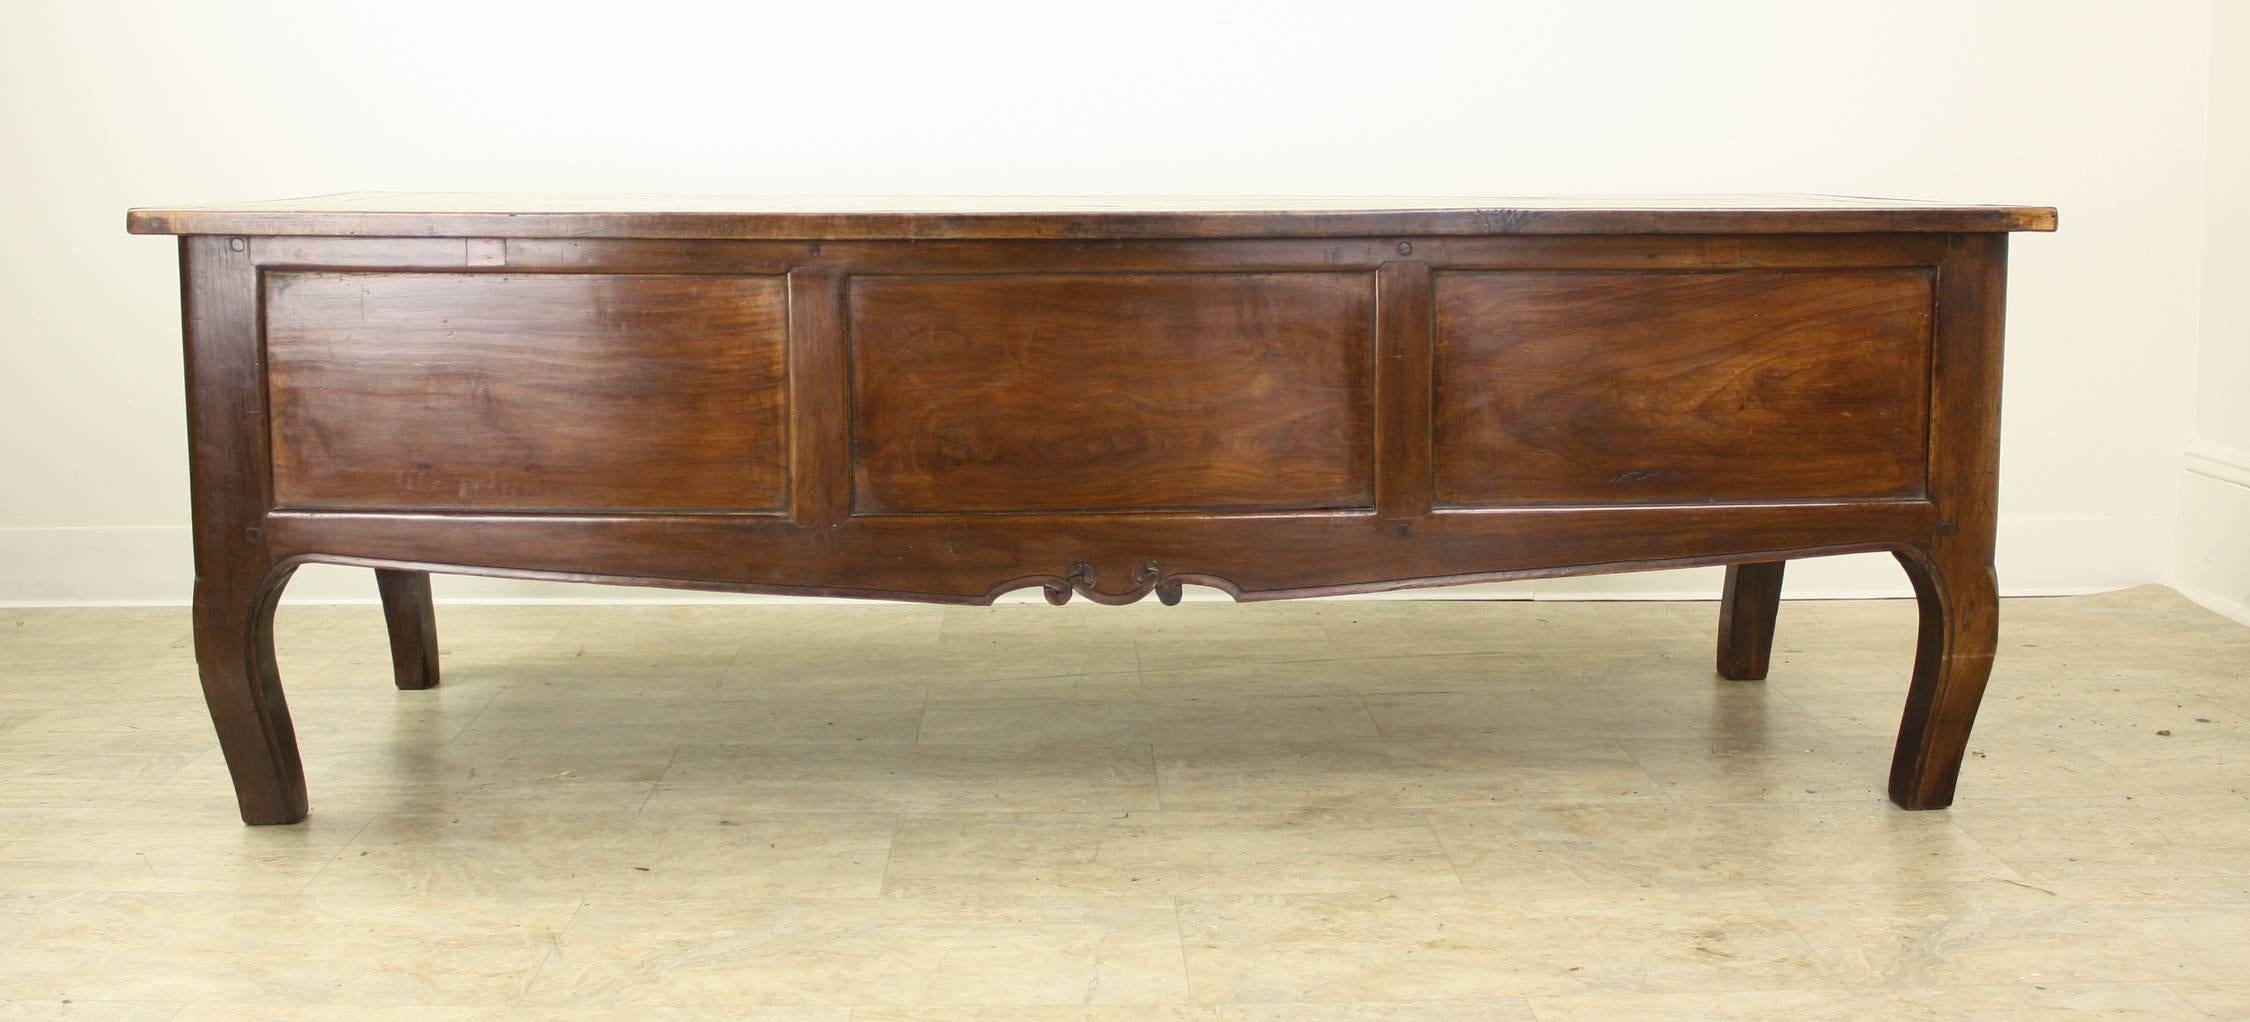 French Antique Cherry Coffee Table with Cabriole Legs